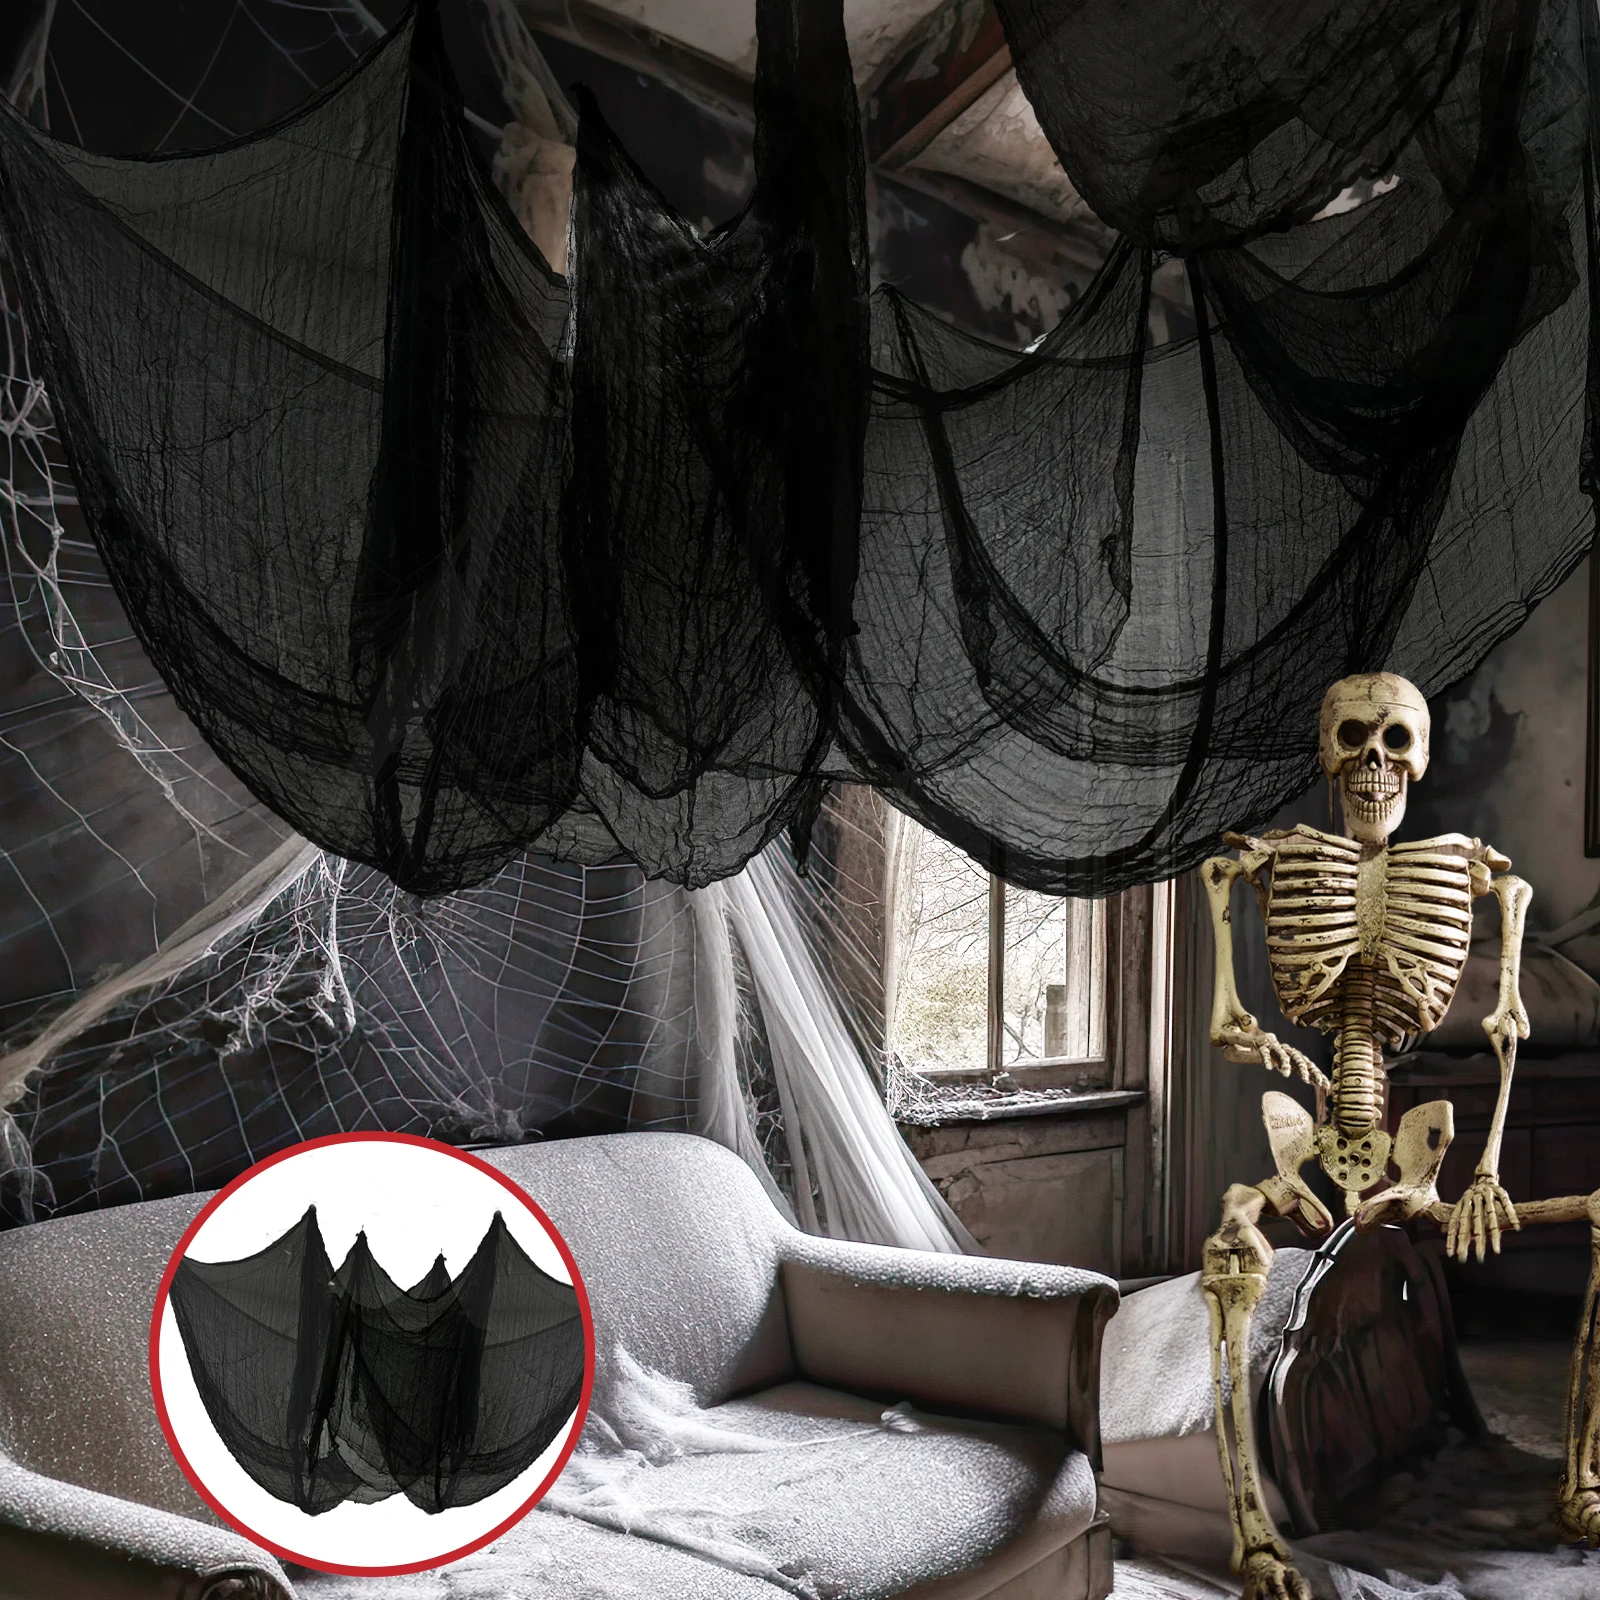 

OurWarm Gauze Creepy Cloths Halloween 1.8M Black Giant Spider Web For Halloween Party Home Scene Decor Horror House Props Supply